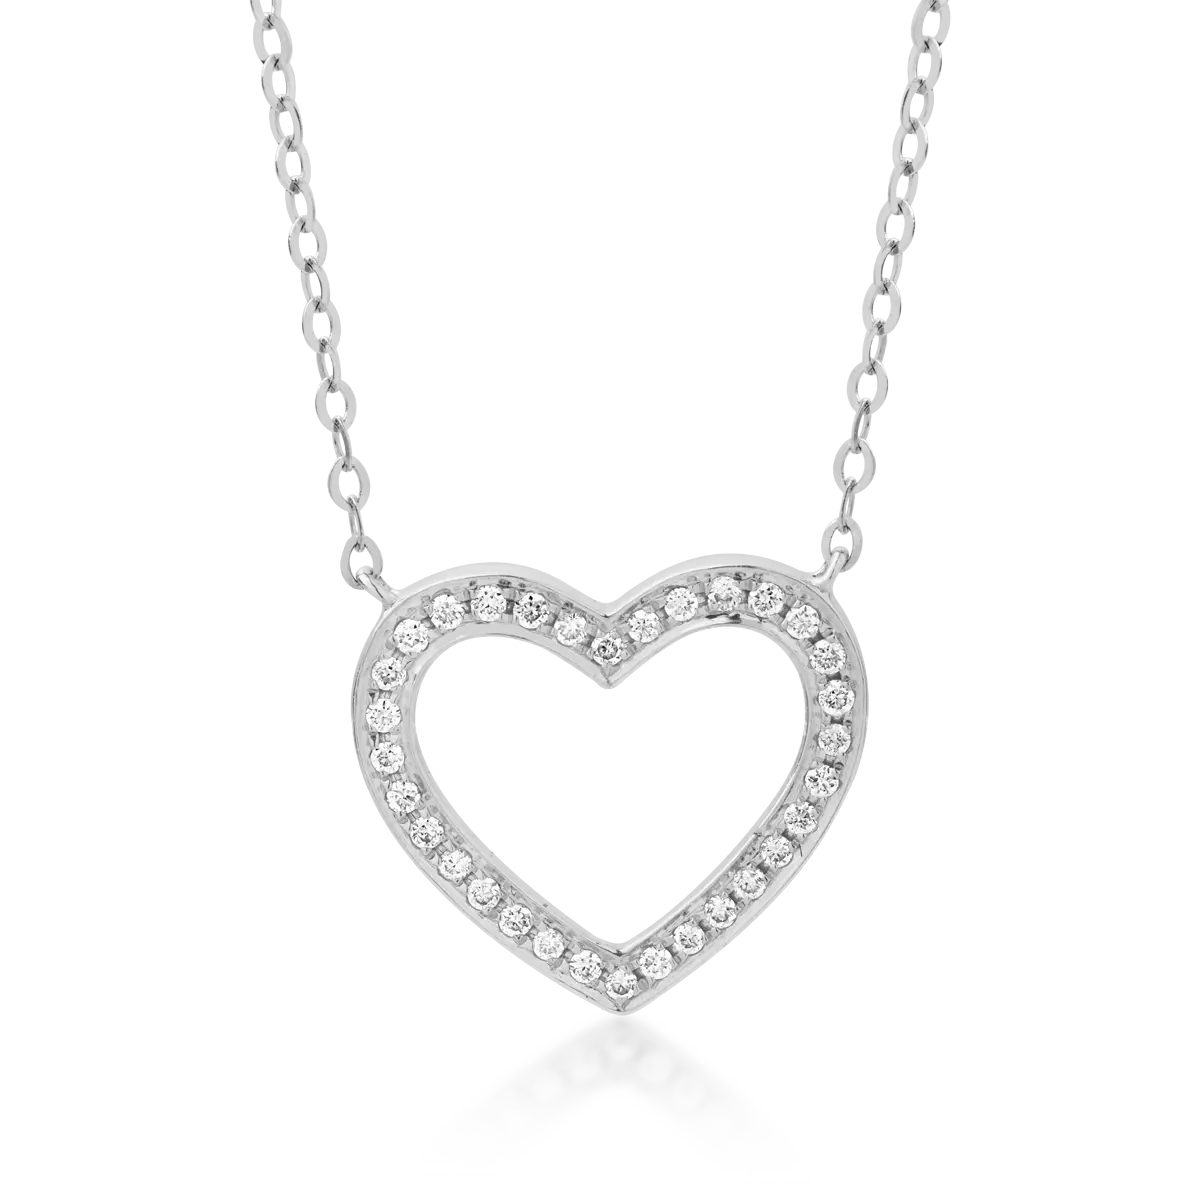 18K white gold heart pendant necklace with 0.068ct diamonds